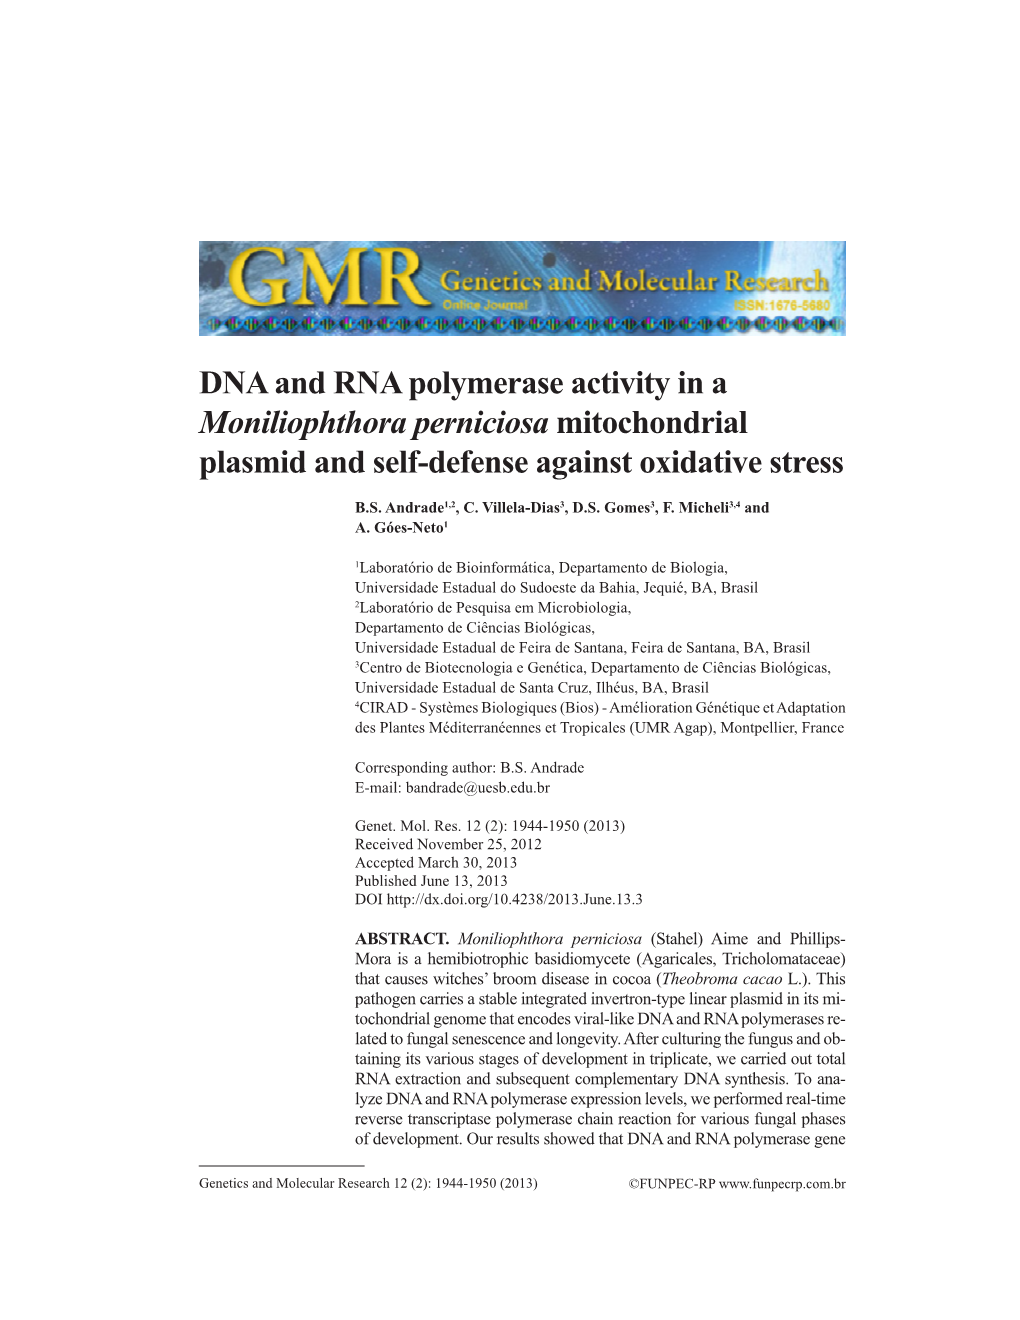 DNA and RNA Polymerase Activity in a Moniliophthora Perniciosa Mitochondrial Plasmid and Self-Defense Against Oxidative Stress